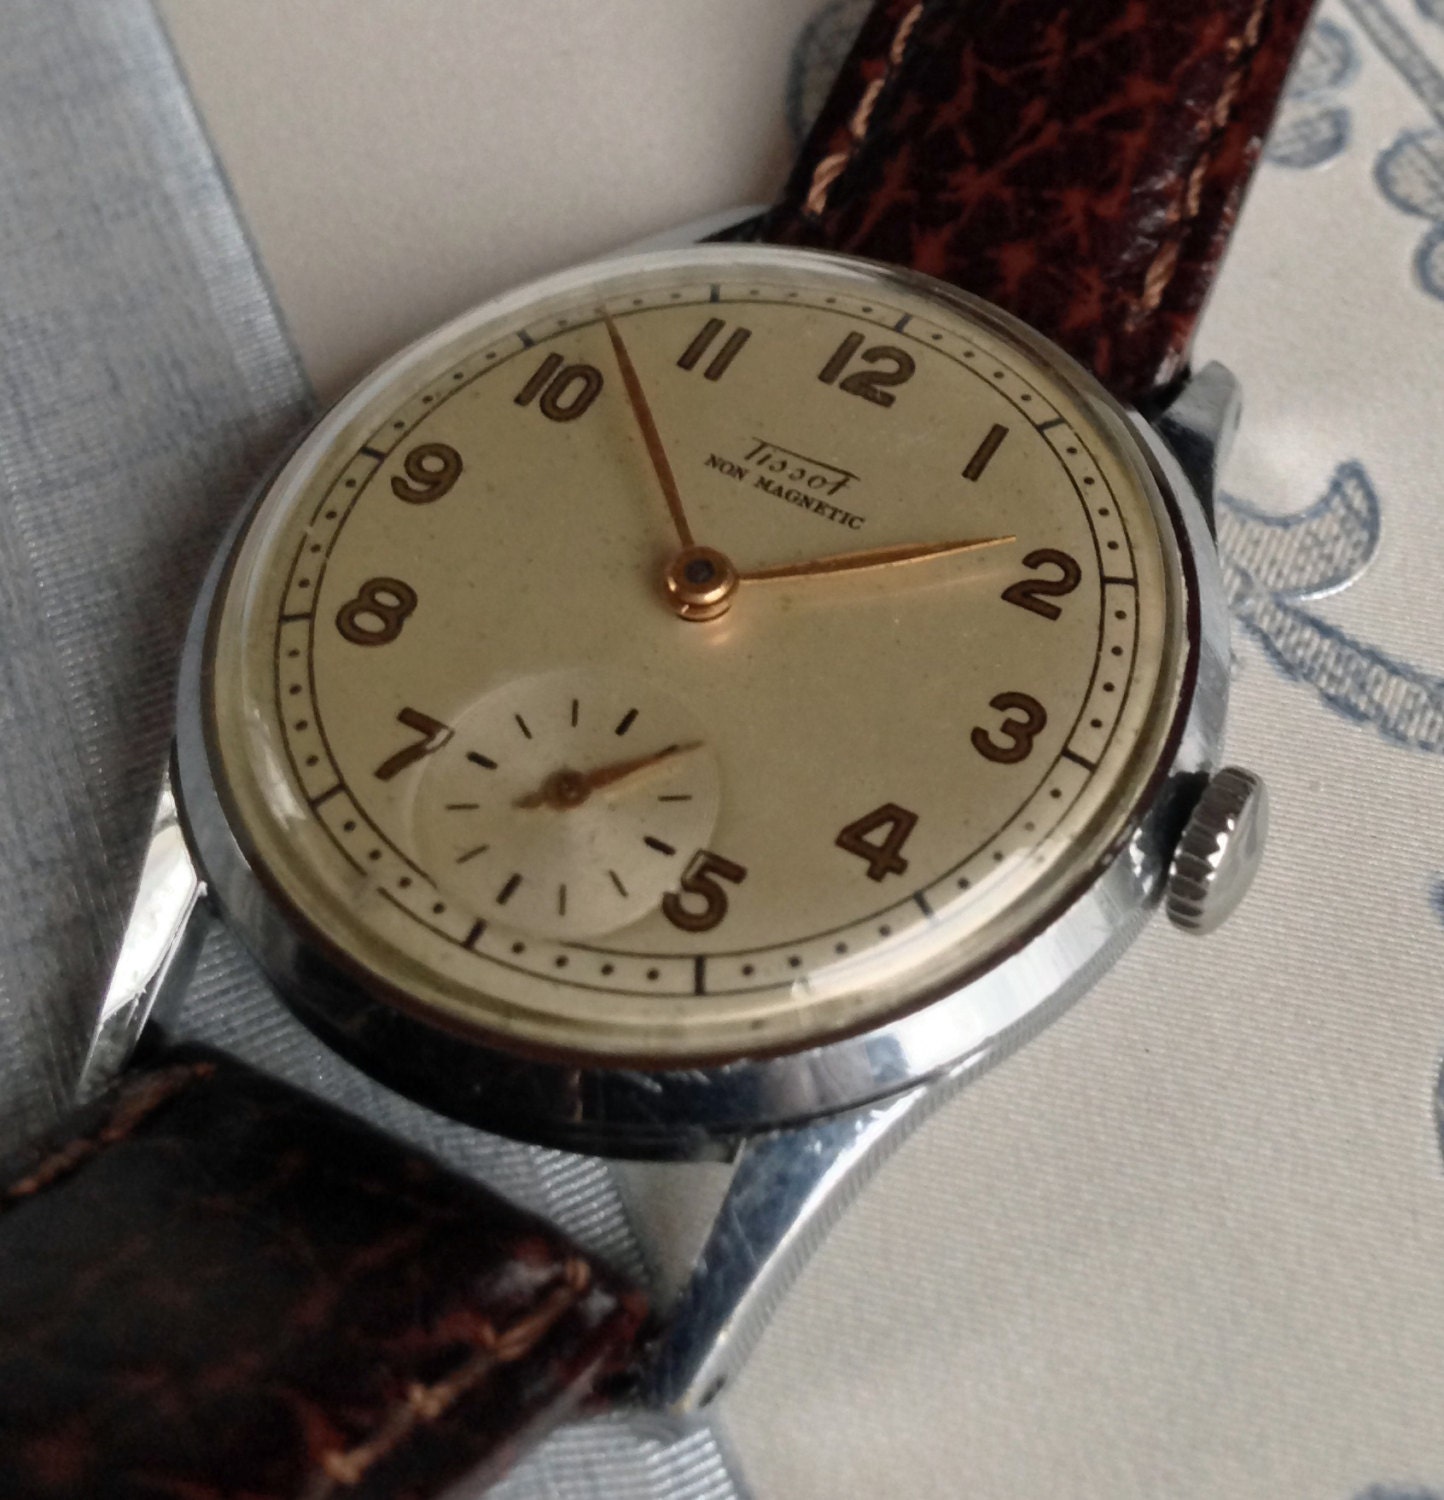 RESERVED for Michael. Exceptional 1953 Tissot 15 Jewel mens